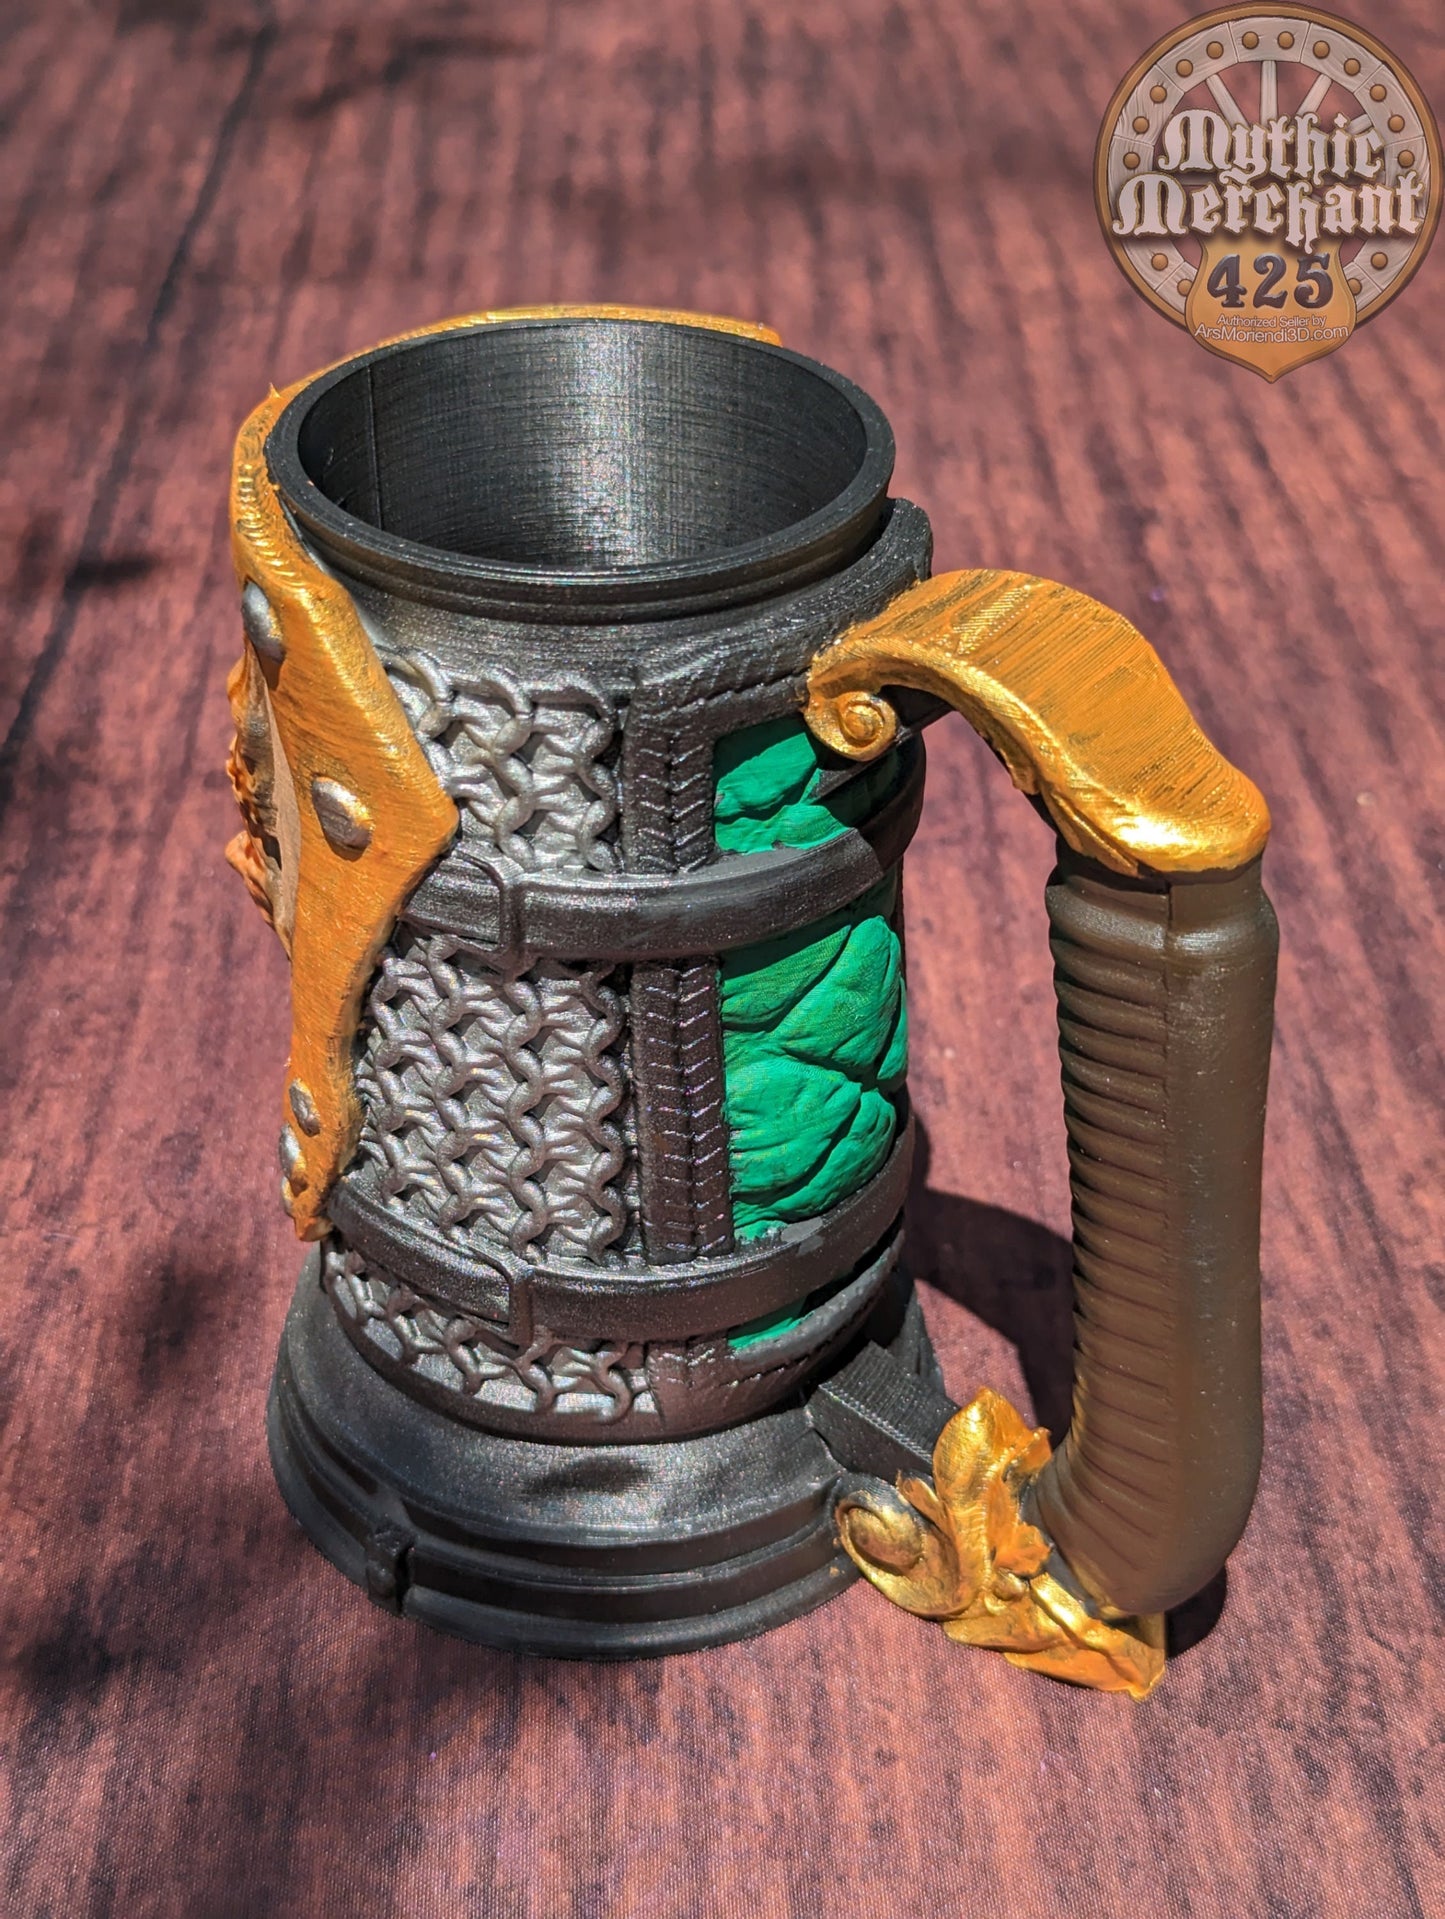 Fighter Class 3D Printed Dice Vault | Drink Koozie | Mug Stein | Tabletop RPG Gaming Fantasy Cosplay - Dungeons and Dragon DnD D&D Wargaming